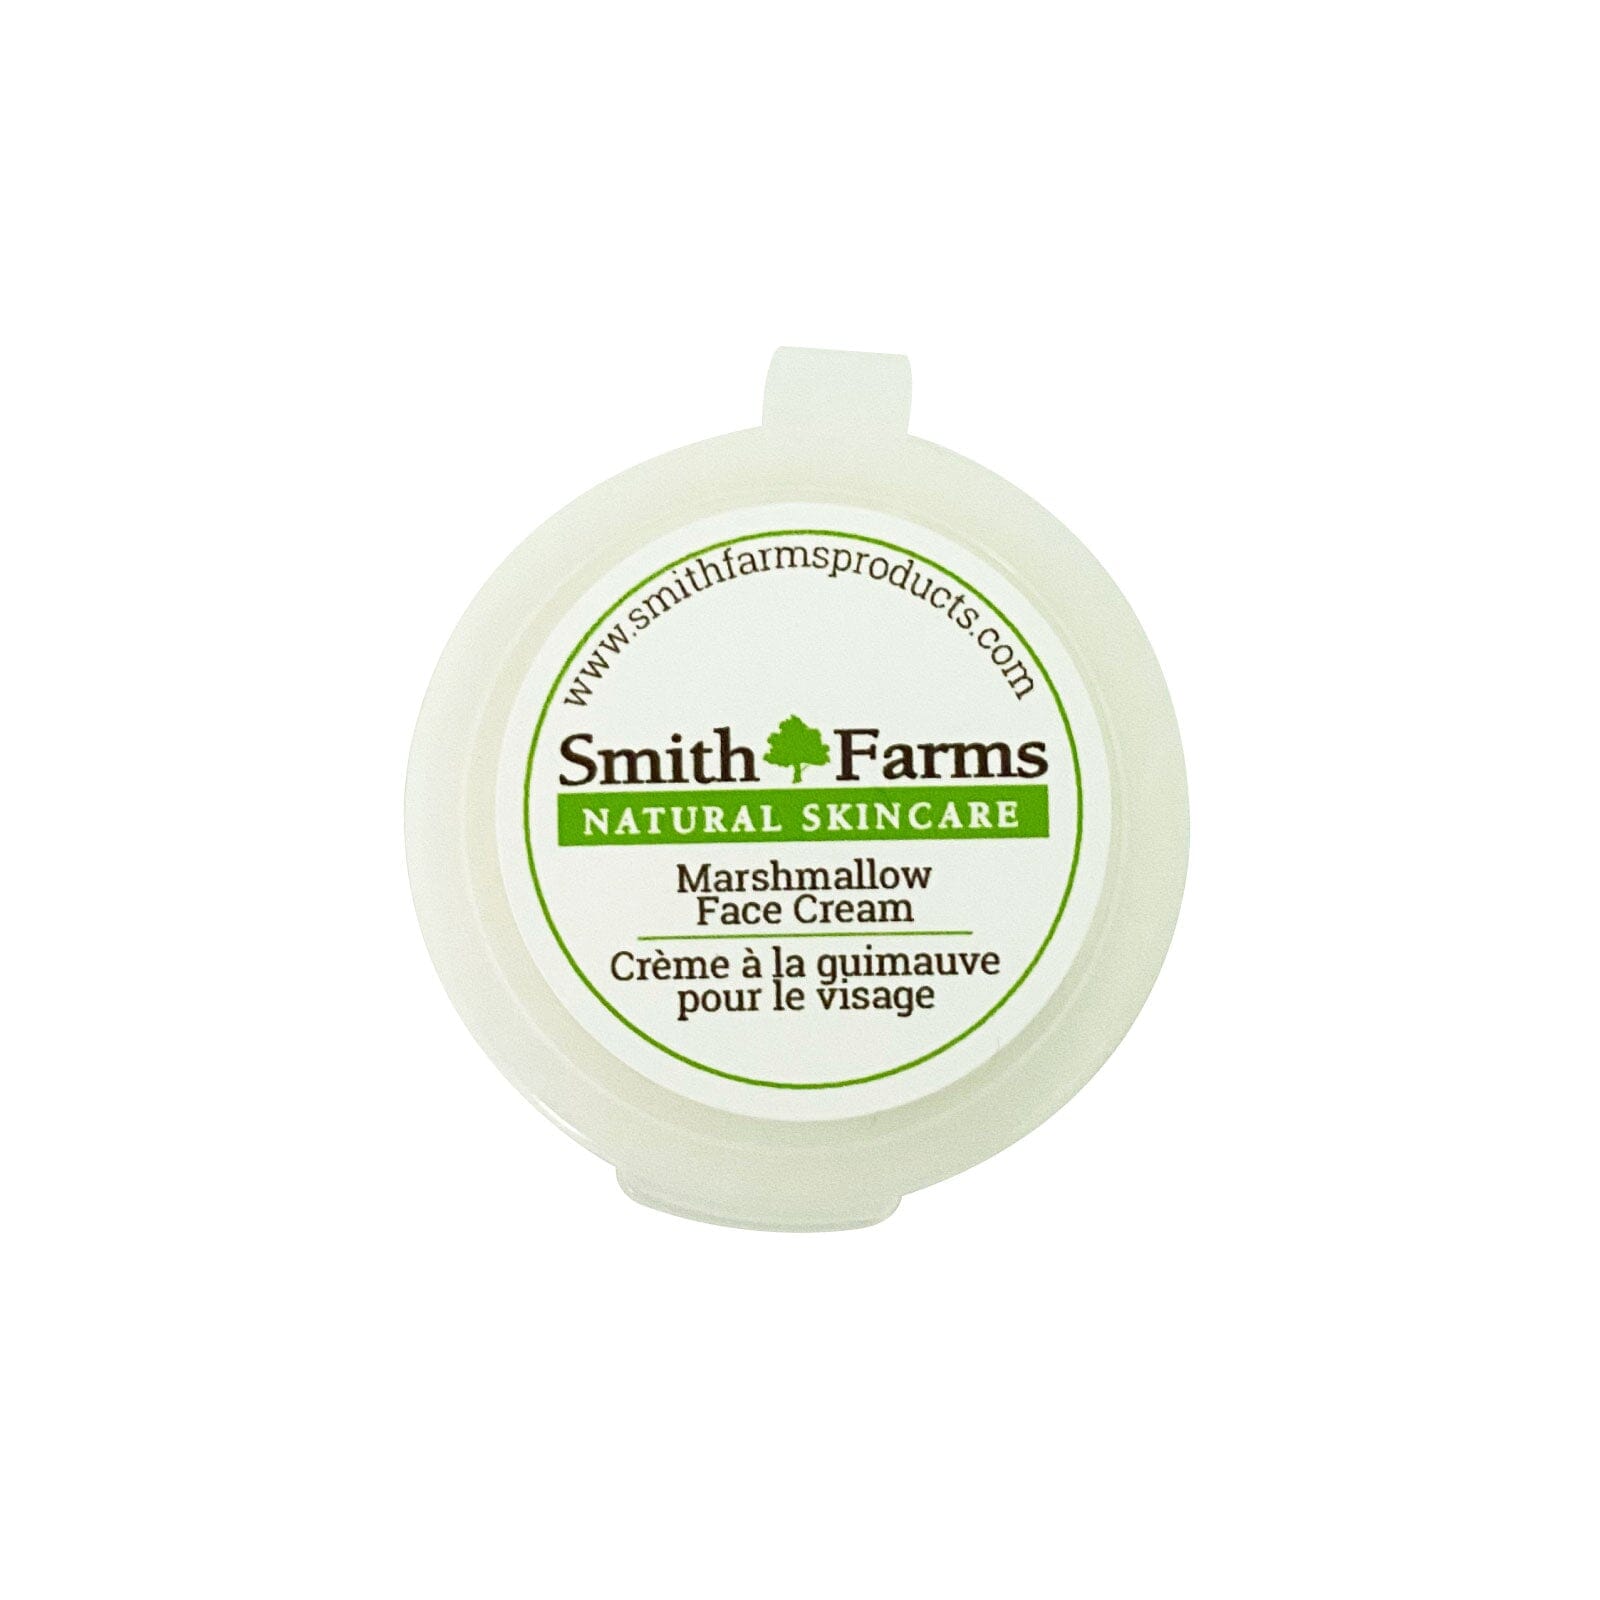 Marshmallow Face Cream Face Care, Our Products Smith Farms 7 ml (sample) 